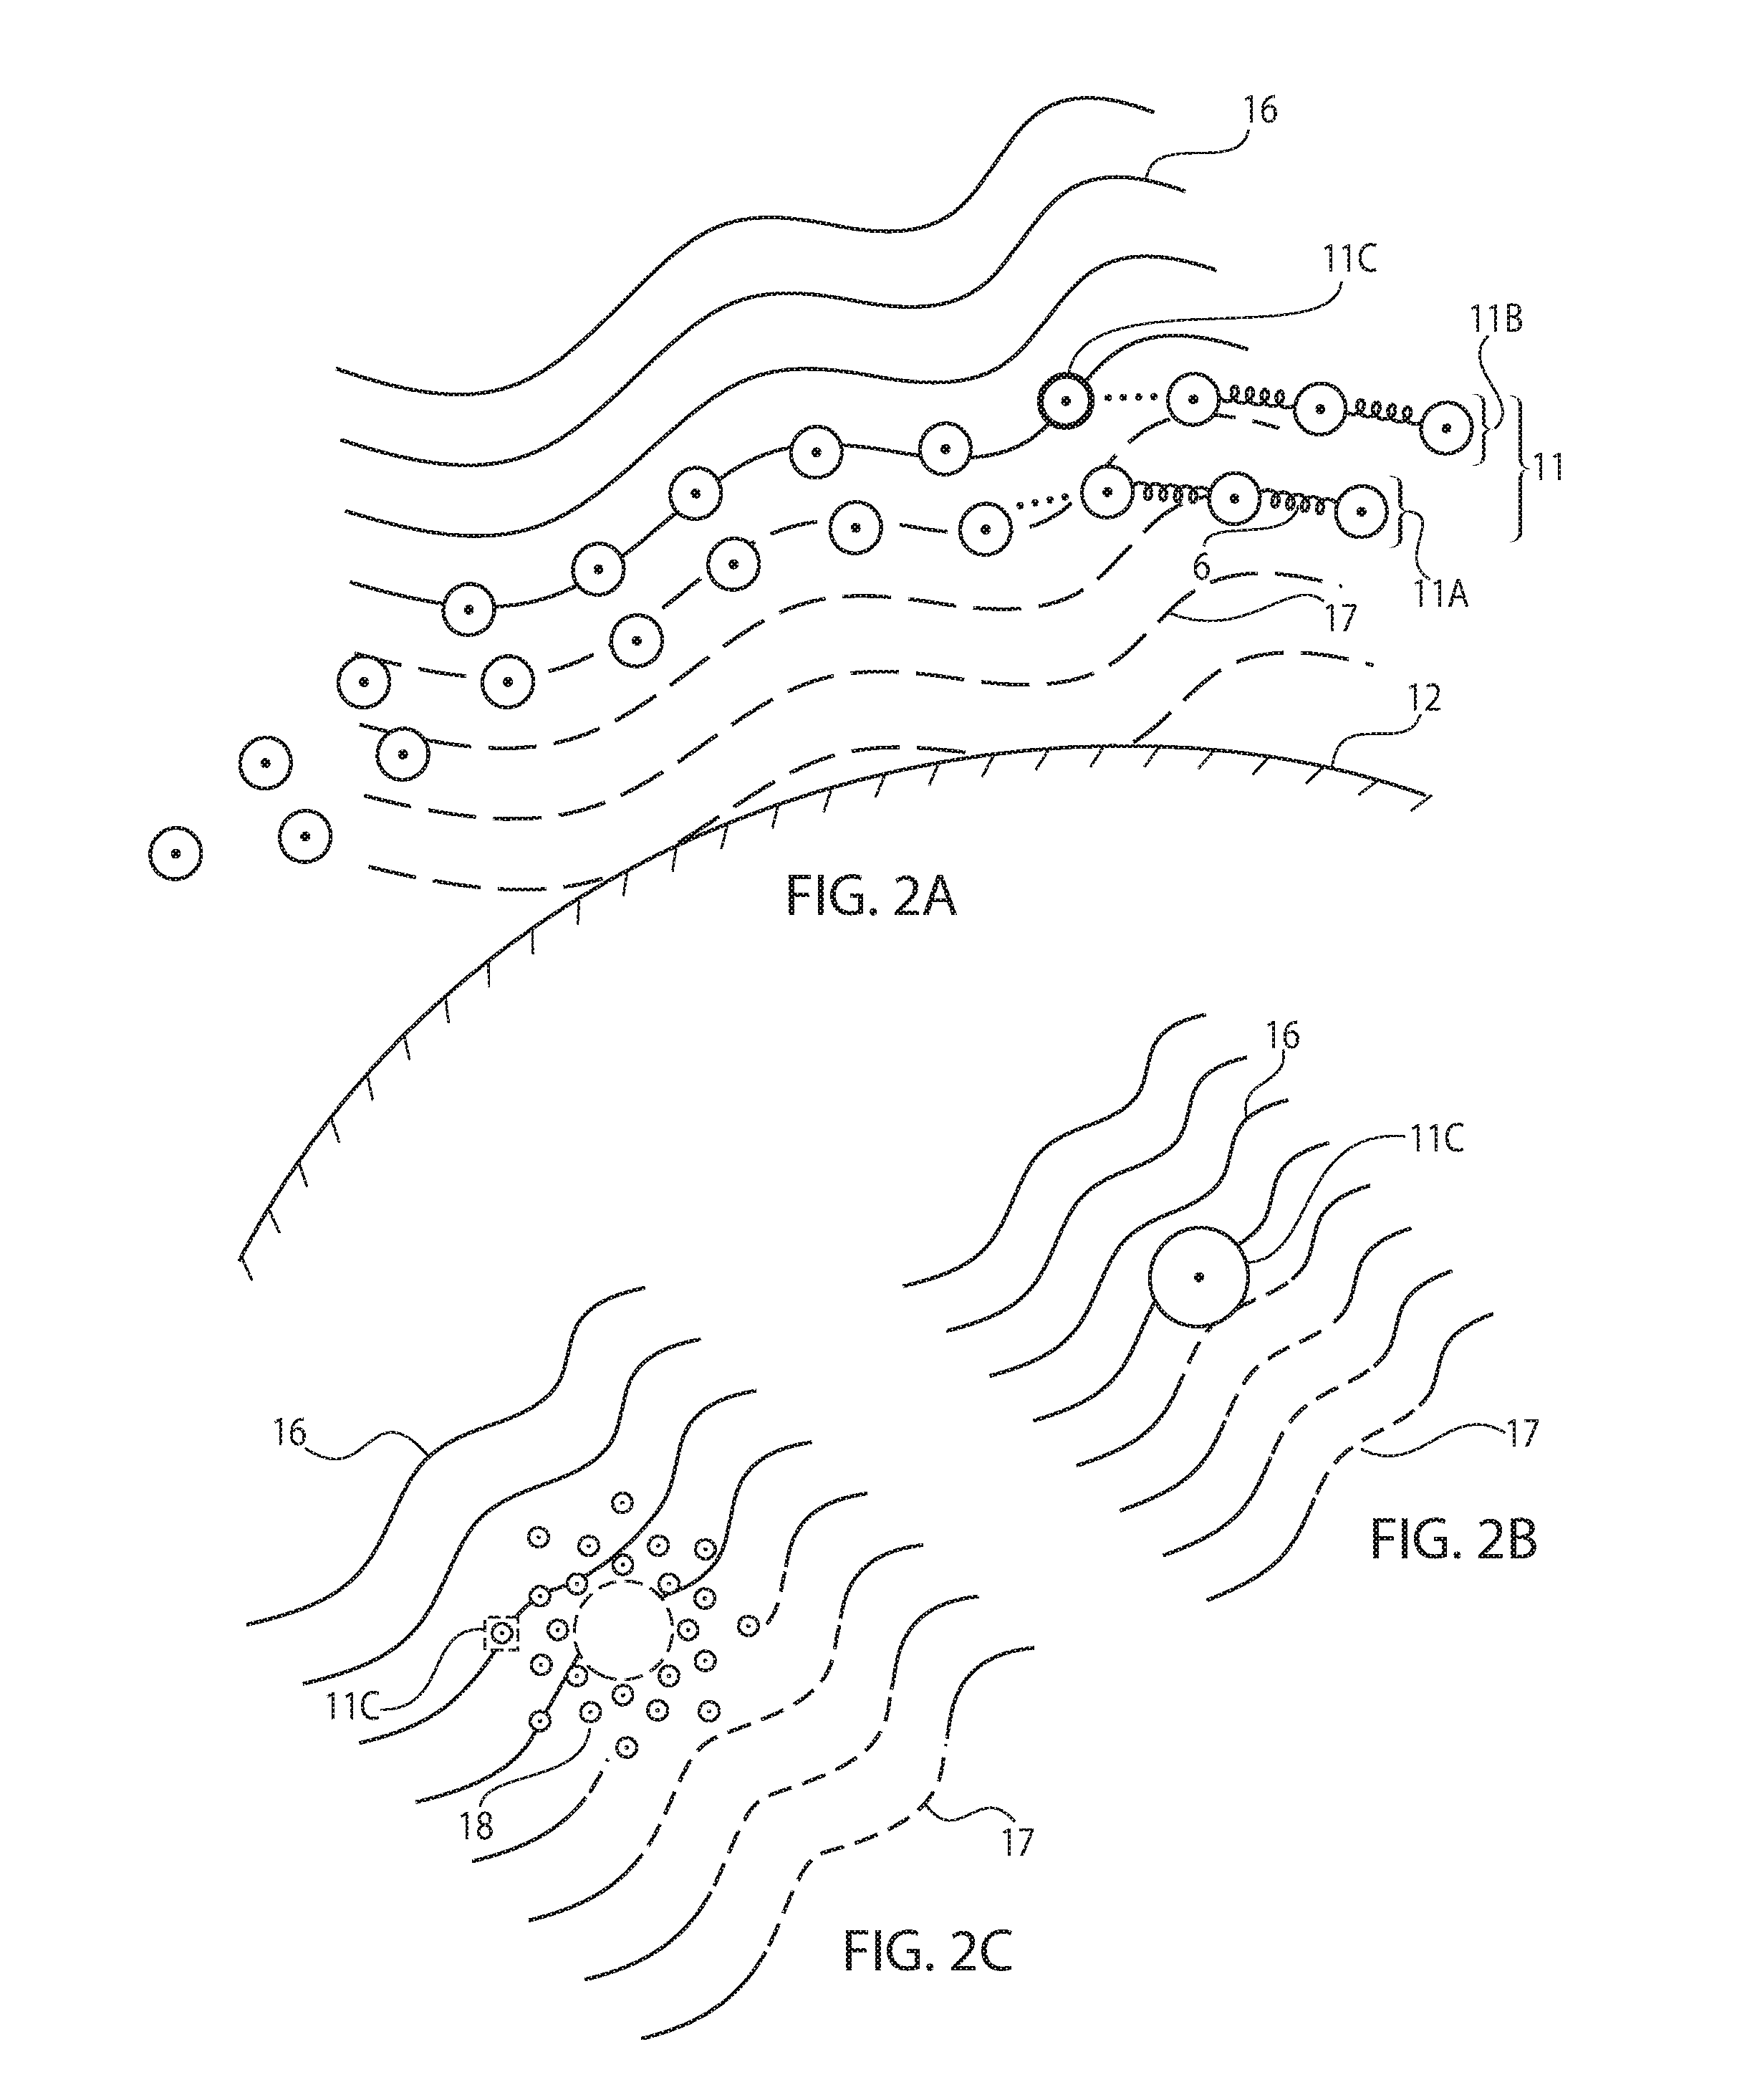 Linear faraday induction generator for the generation of electrical power from ocean wave kinetic energy and arrangements thereof